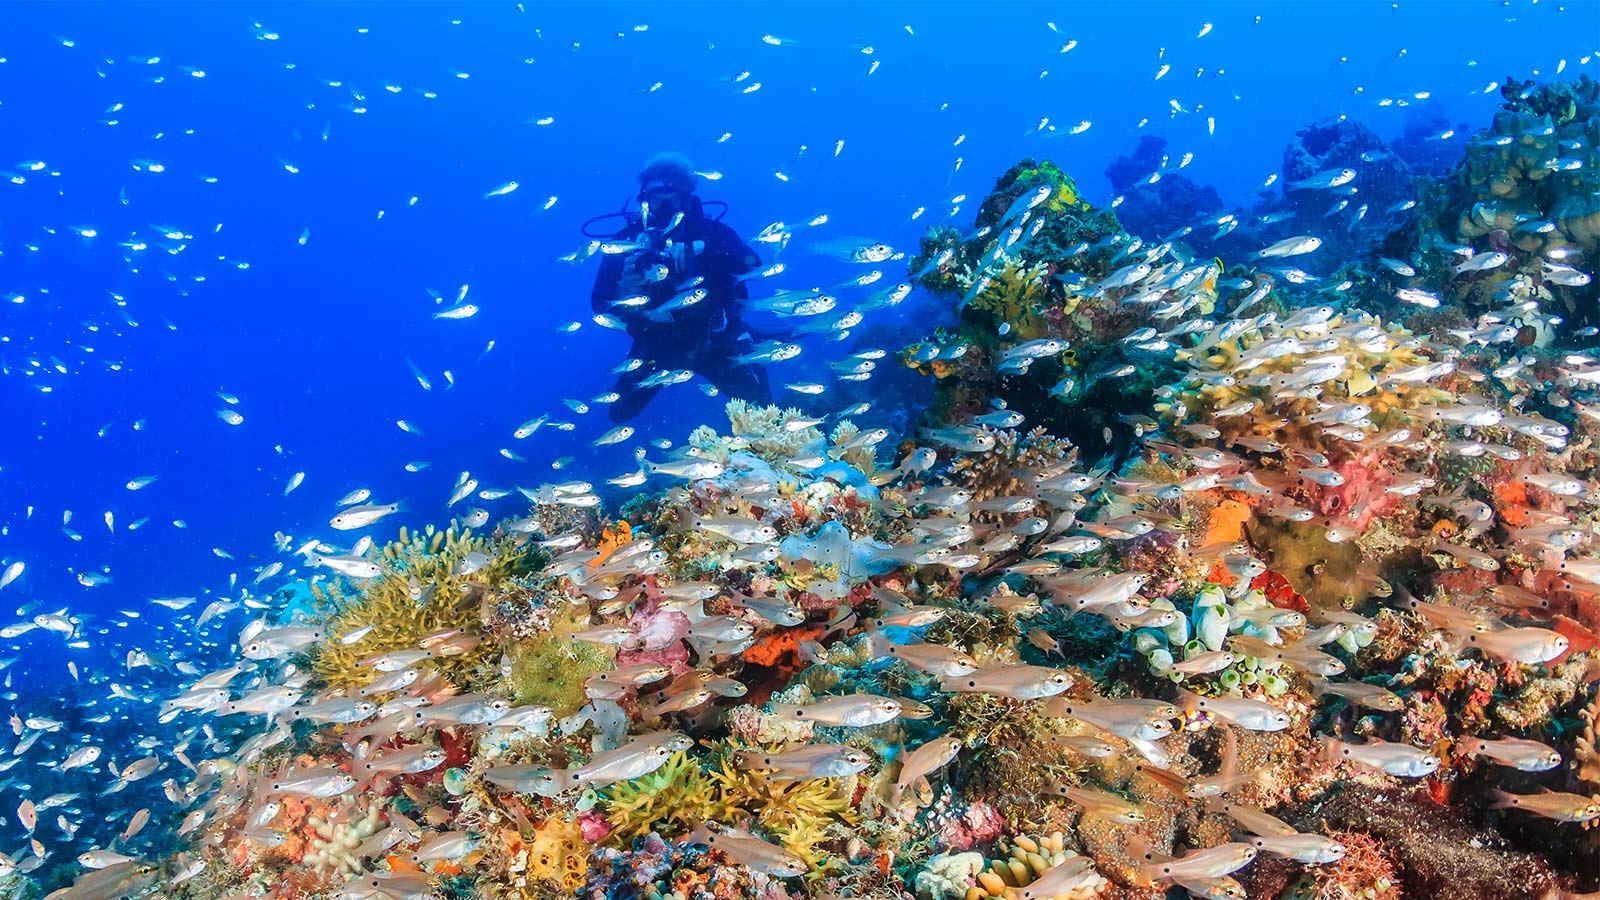 Are you searching for the best diving destinations in the Caribbean for a family SCUBA diving vacation? Discover Bonaire, Cayman Islands, Belize, and more!